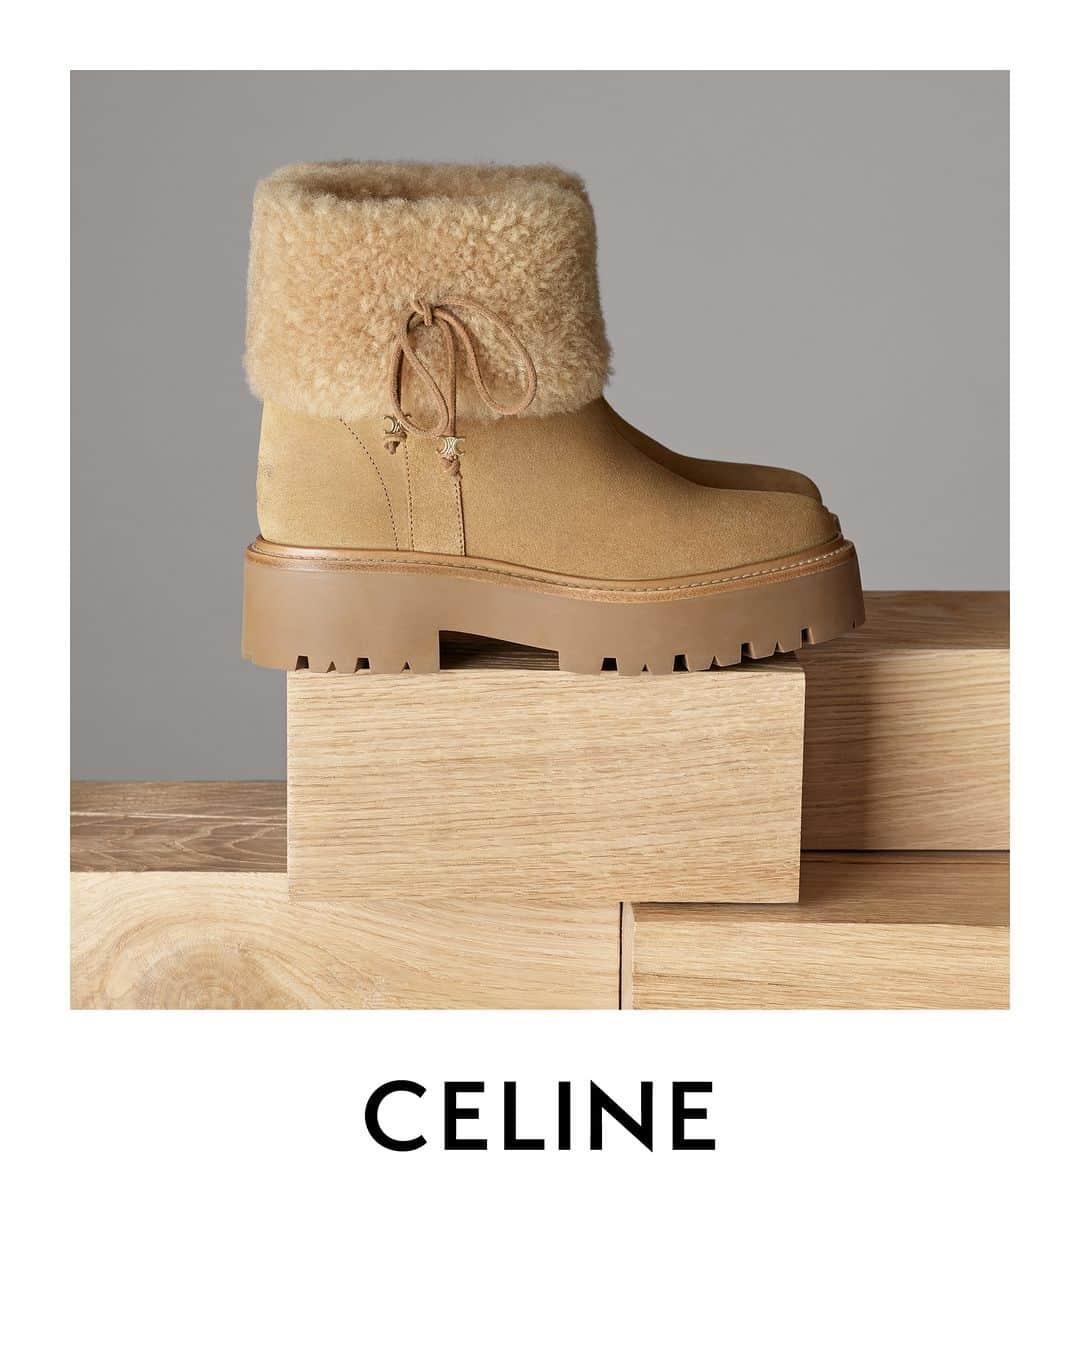 Celineのインスタグラム：「CELINE HOLIDAYS  CELINE BULKY CROPPED BOOT   COLLECTION AVAILABLE NOW IN STORES AND ON CELINE.COM  @HEDISLIMANE PHOTOGRAPHY  #CELINEHOLIDAYS #CELINEBYHEDISLIMANE」